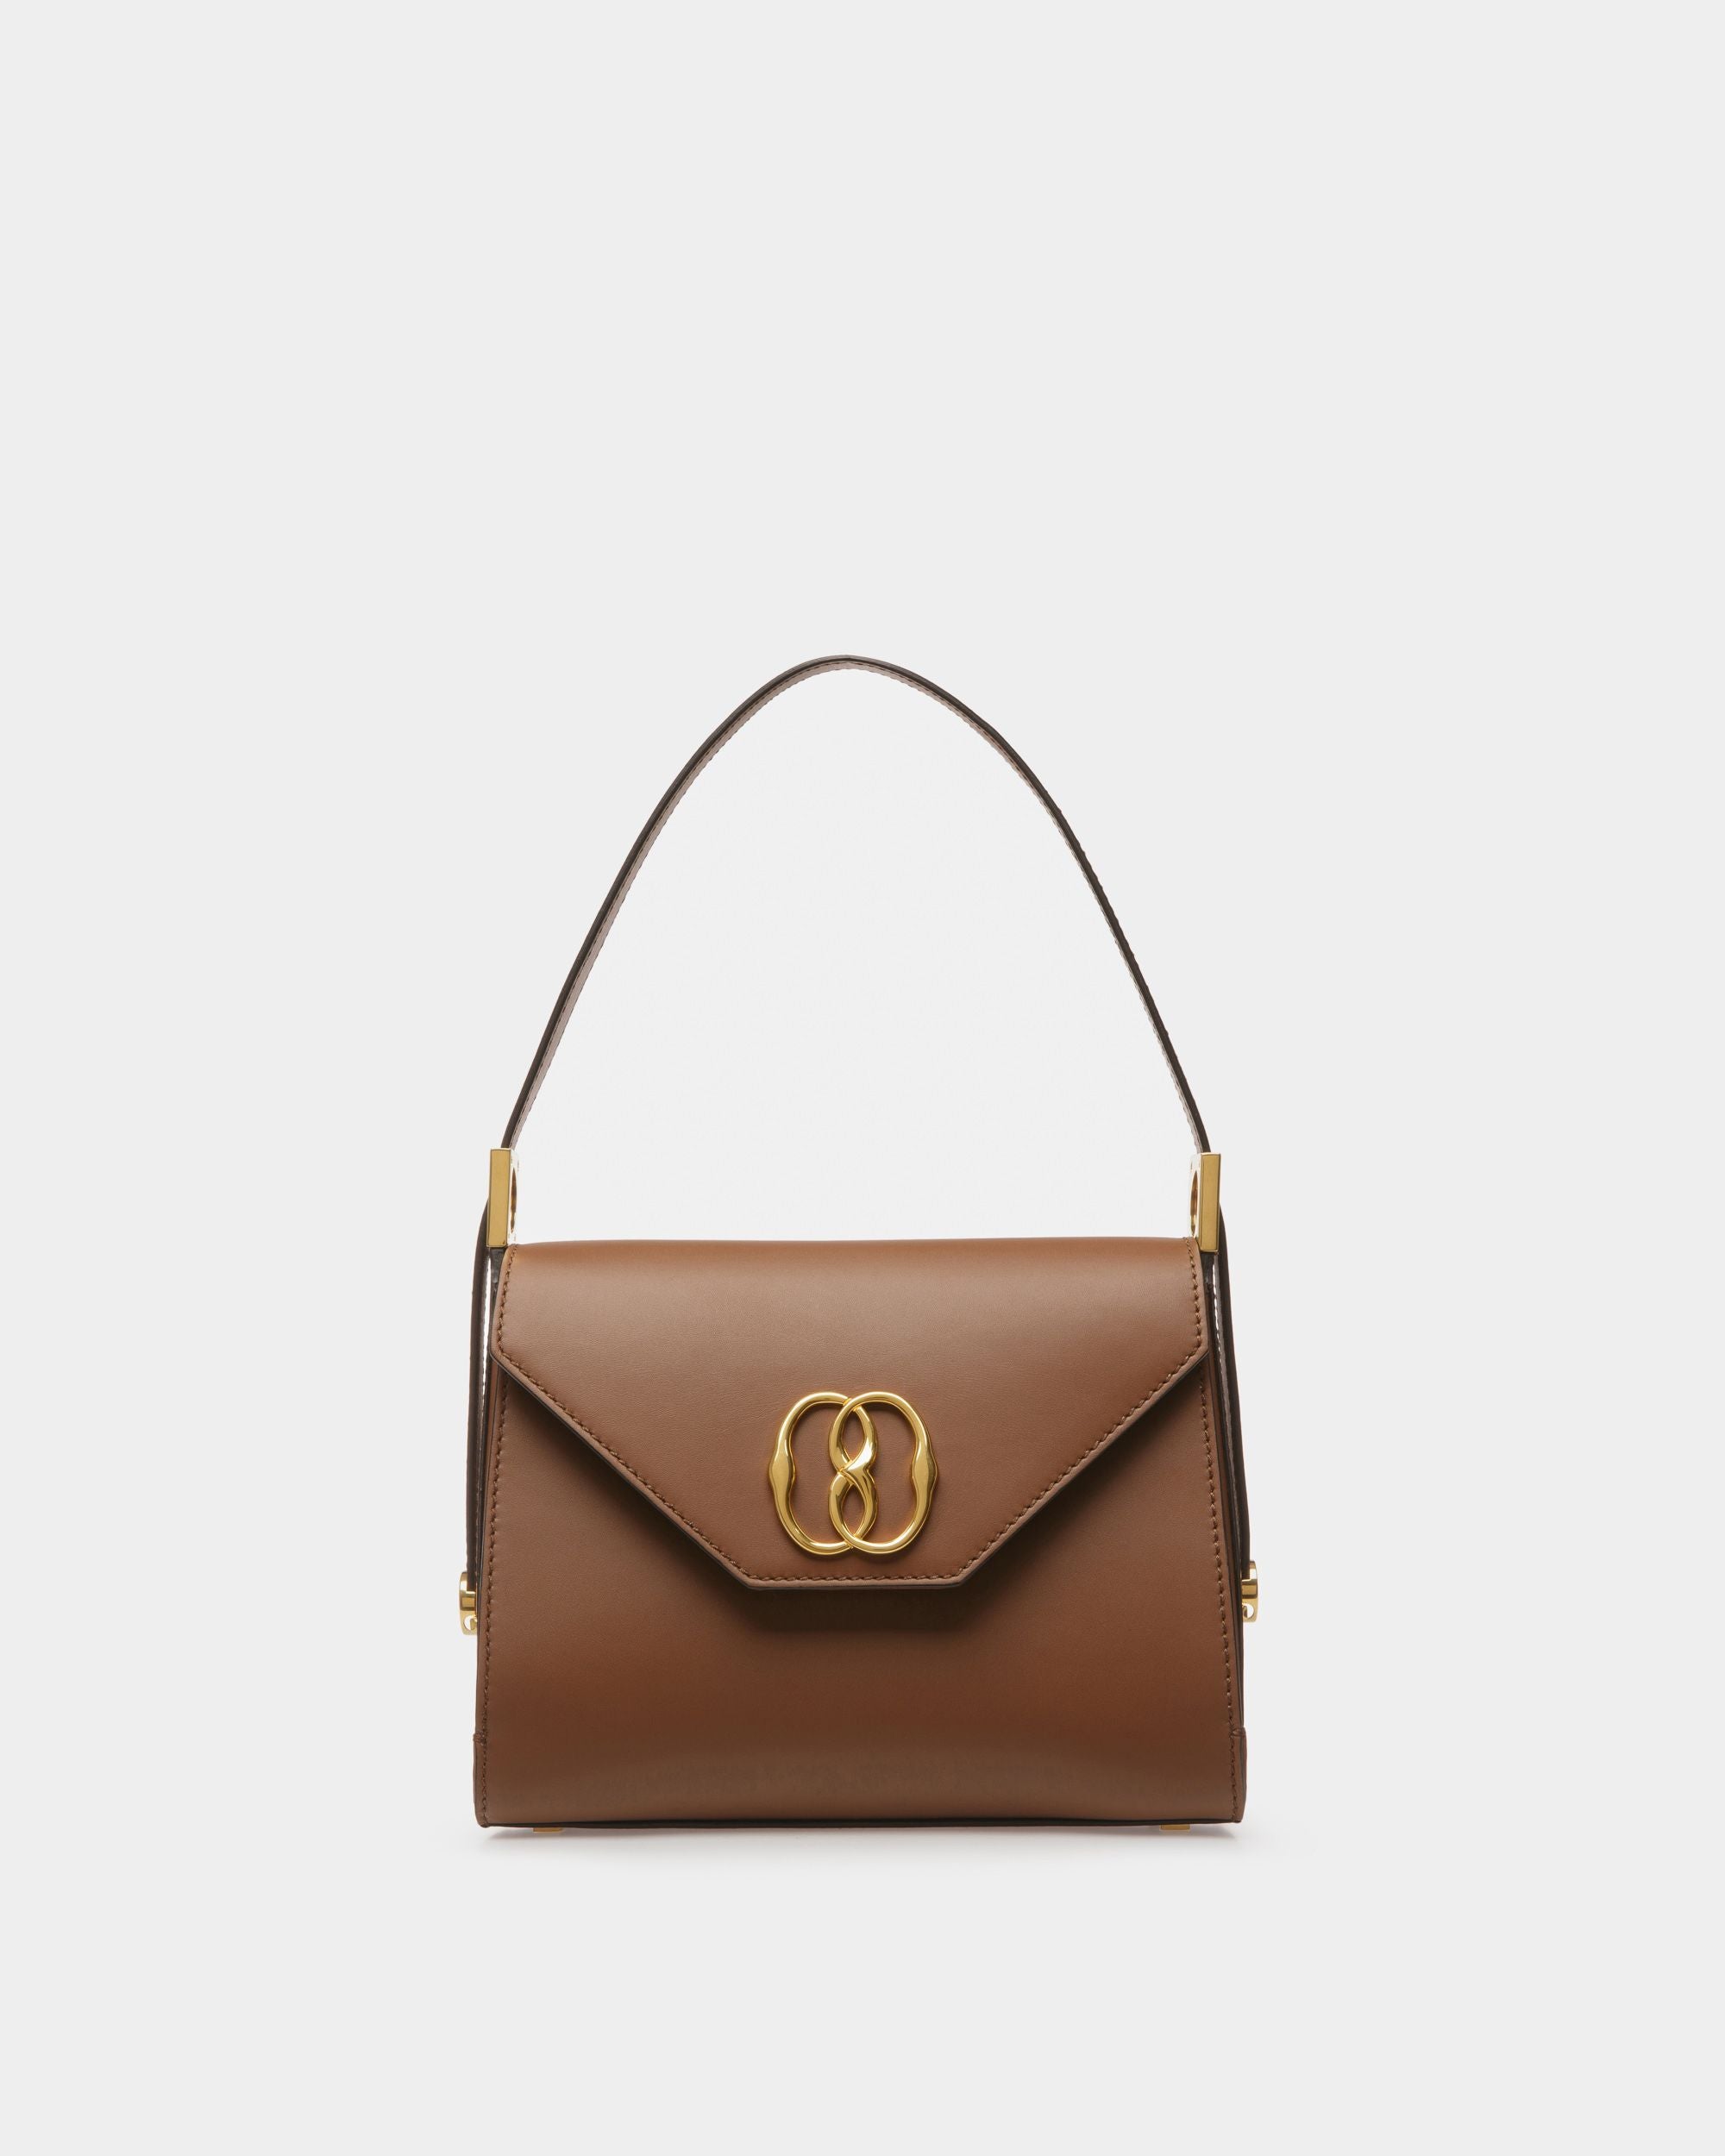 Women's Emblem Top Handle Bag In Brown Leather | Bally | Still Life Front